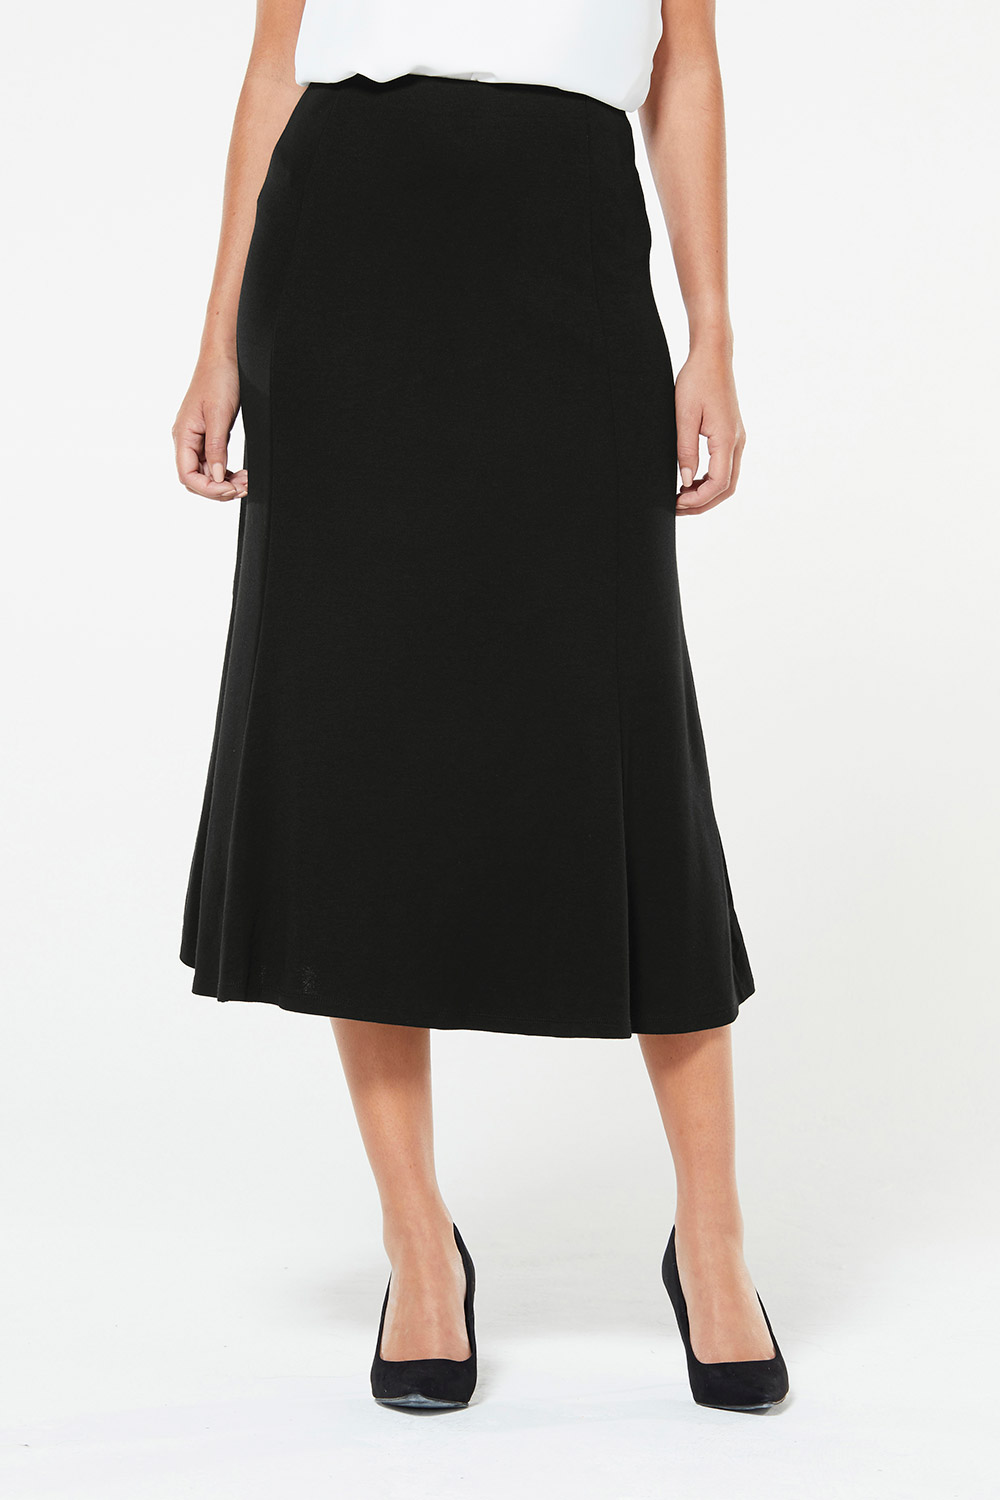 Classic Cut About Jersey Crepe Skirt | Home Delivery | Bonmarché